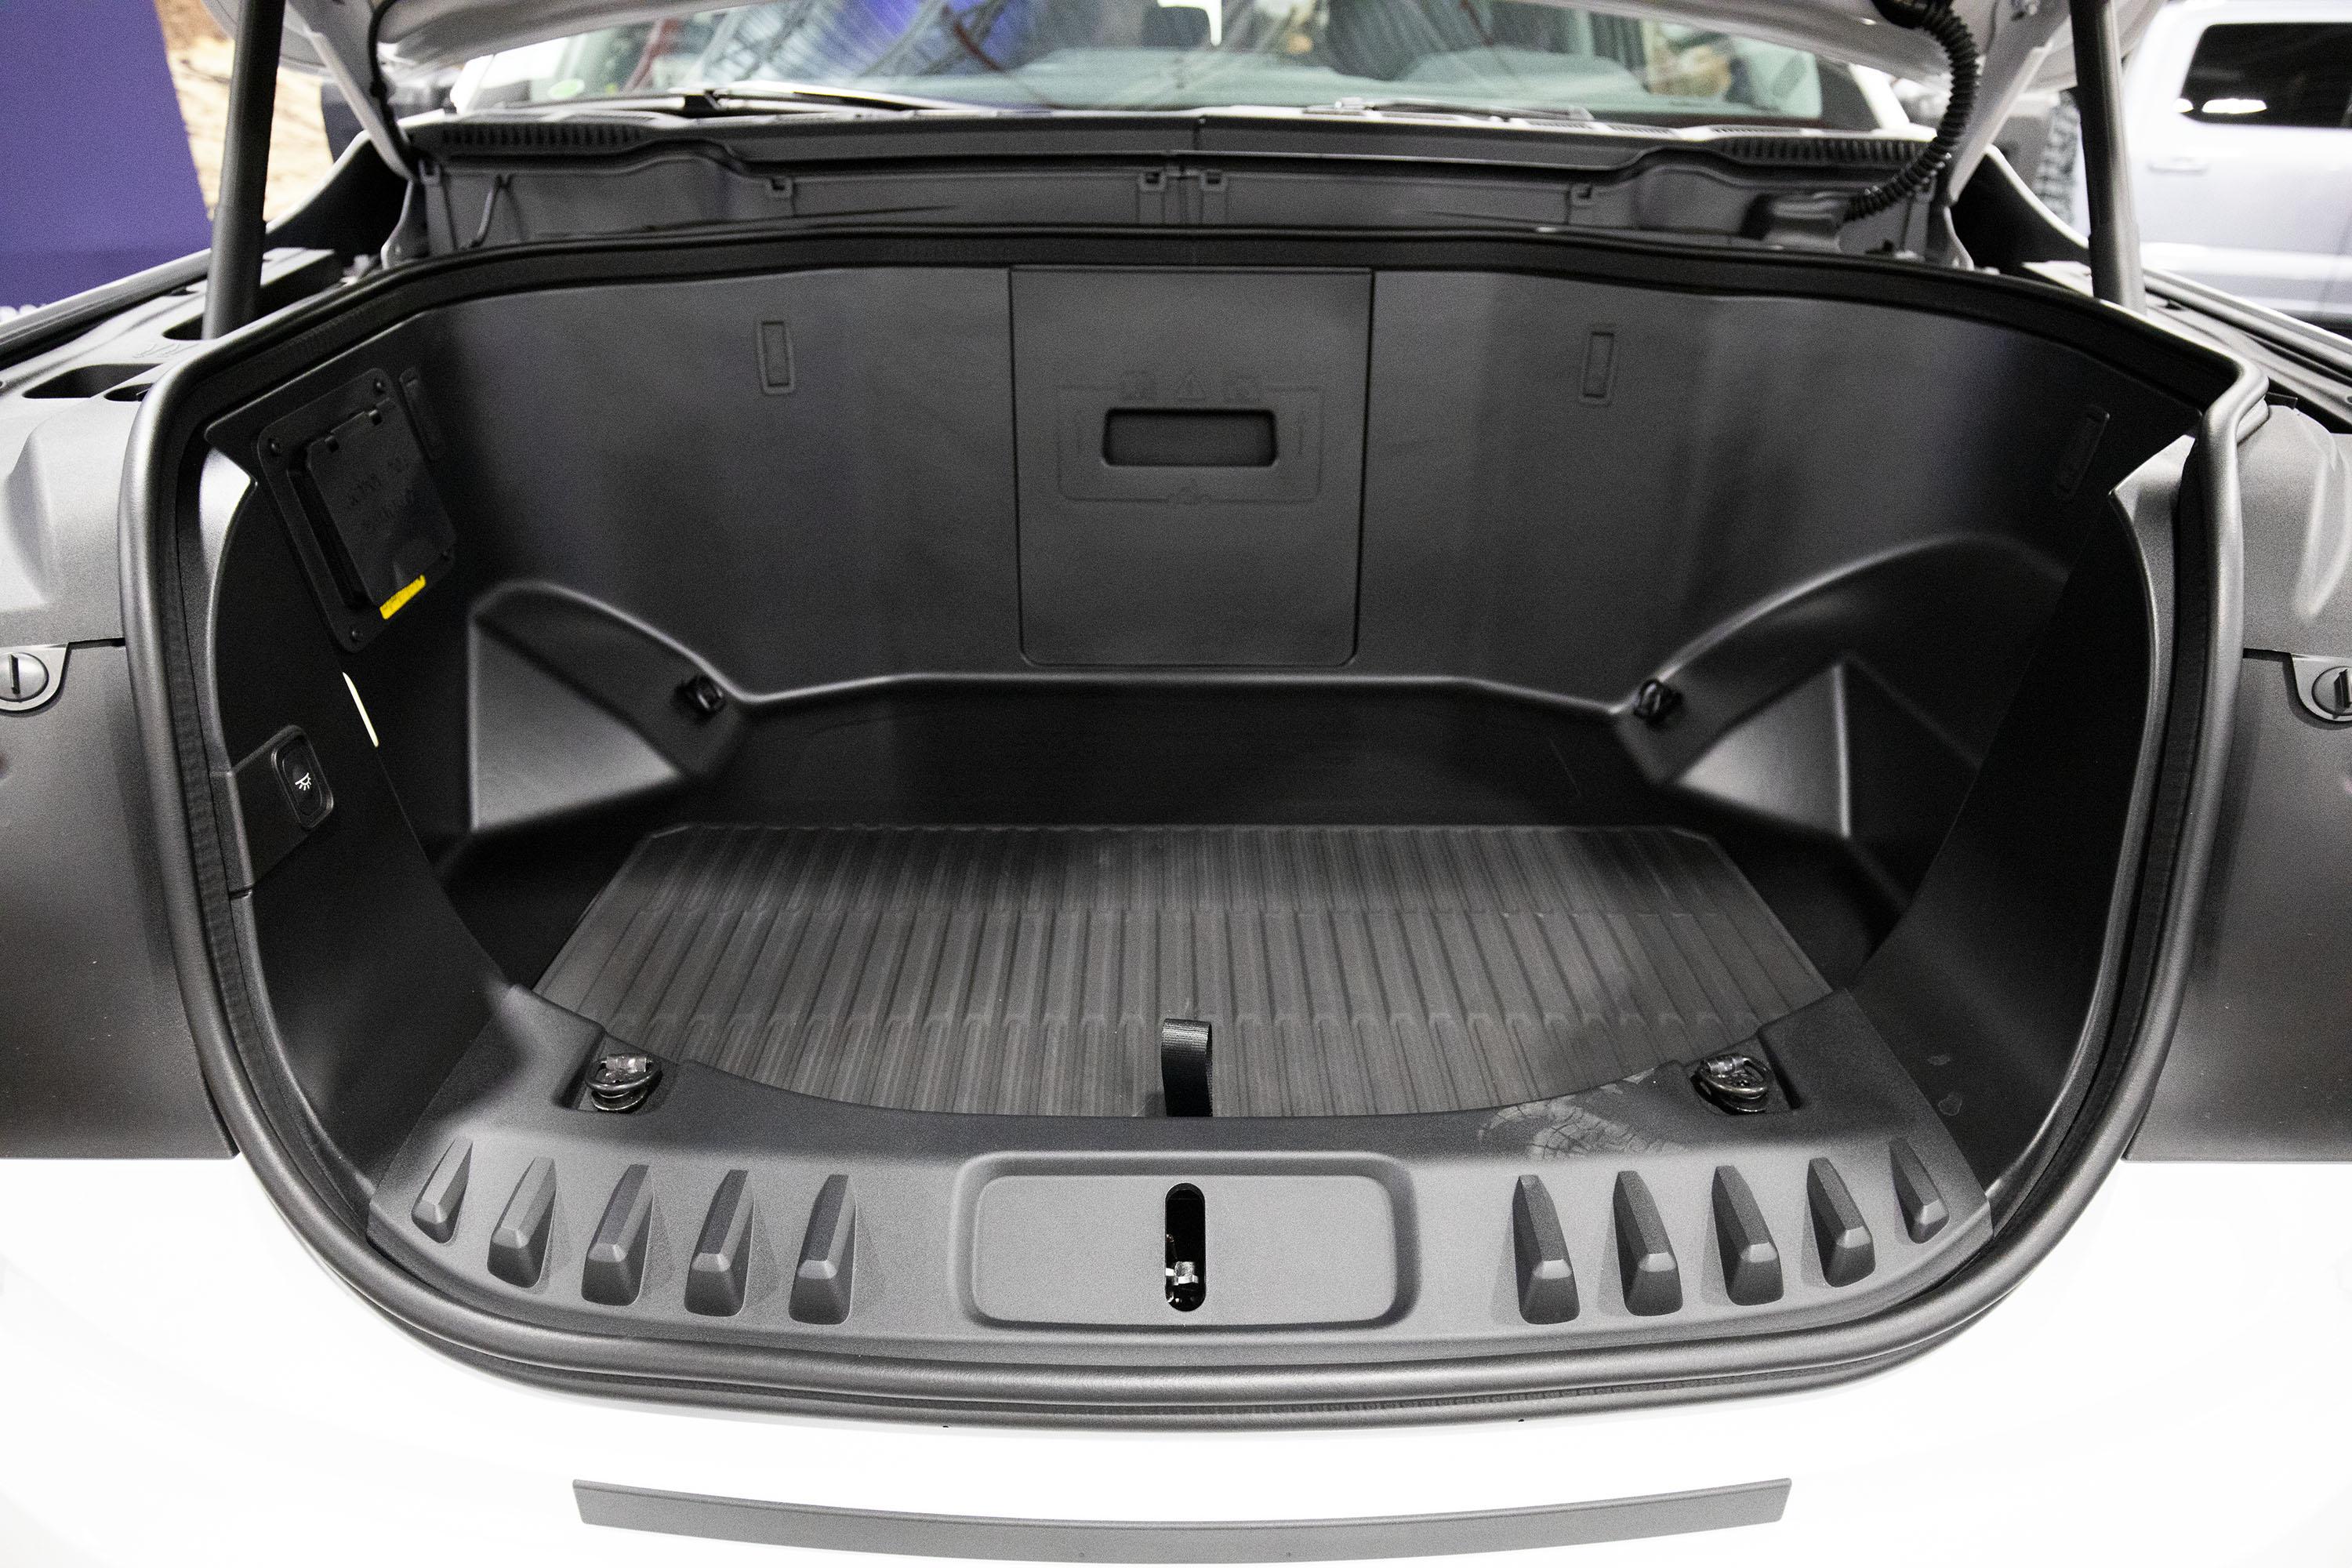 DEARBORN, MI - APRIL 26: The "frunk", the front trunk area of a Ford F-150 Lightning pickup truck, is shown at the Ford Rouge Electric Vehicle Center on April 26, 2022 in Dearborn, Michigan. The F-150 Lightning is positioned to be the first full-size all-electric pickup truck to go on sale in the mainstream U.S. market. (Photo by Bill Pugliano/Getty Images)